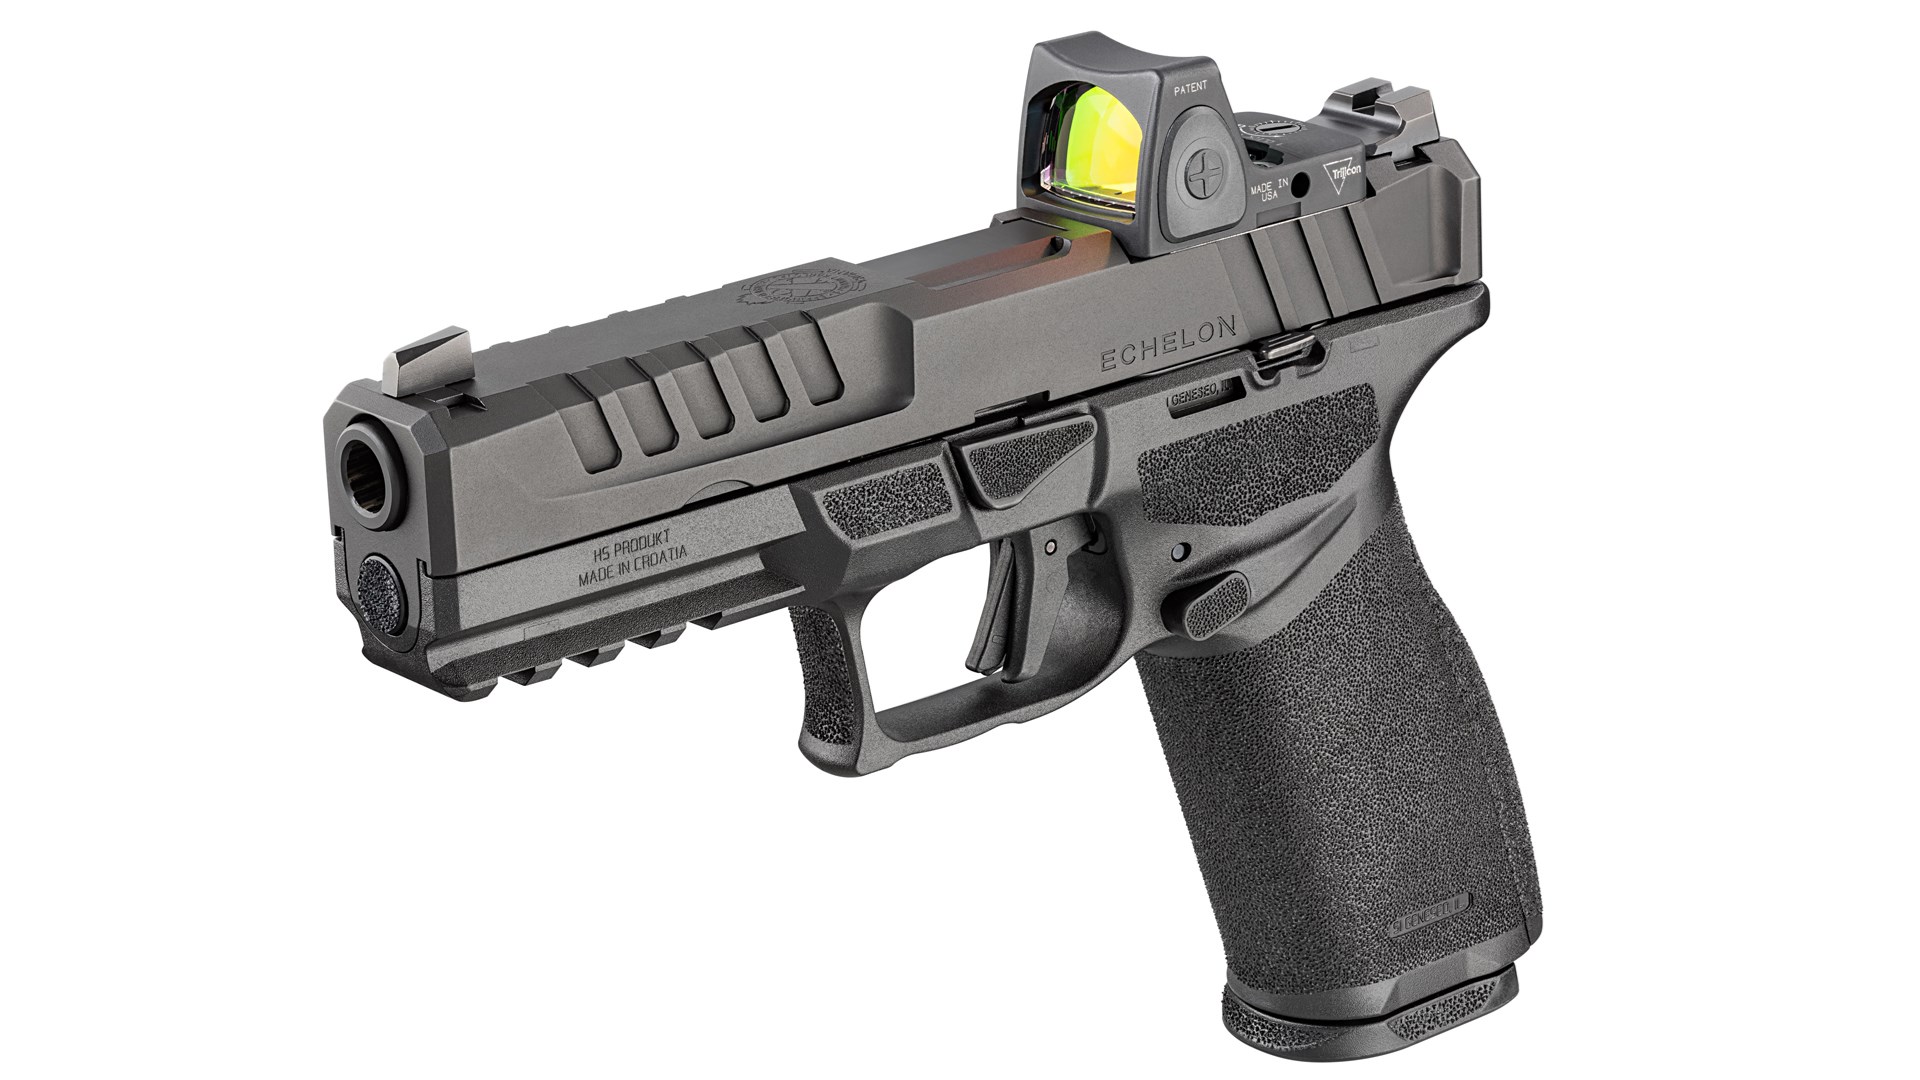 Left side of the Springfield Armory Echelon series handgun, showing a mounted Trijicon RMR red-dot optic on top of the pistol.